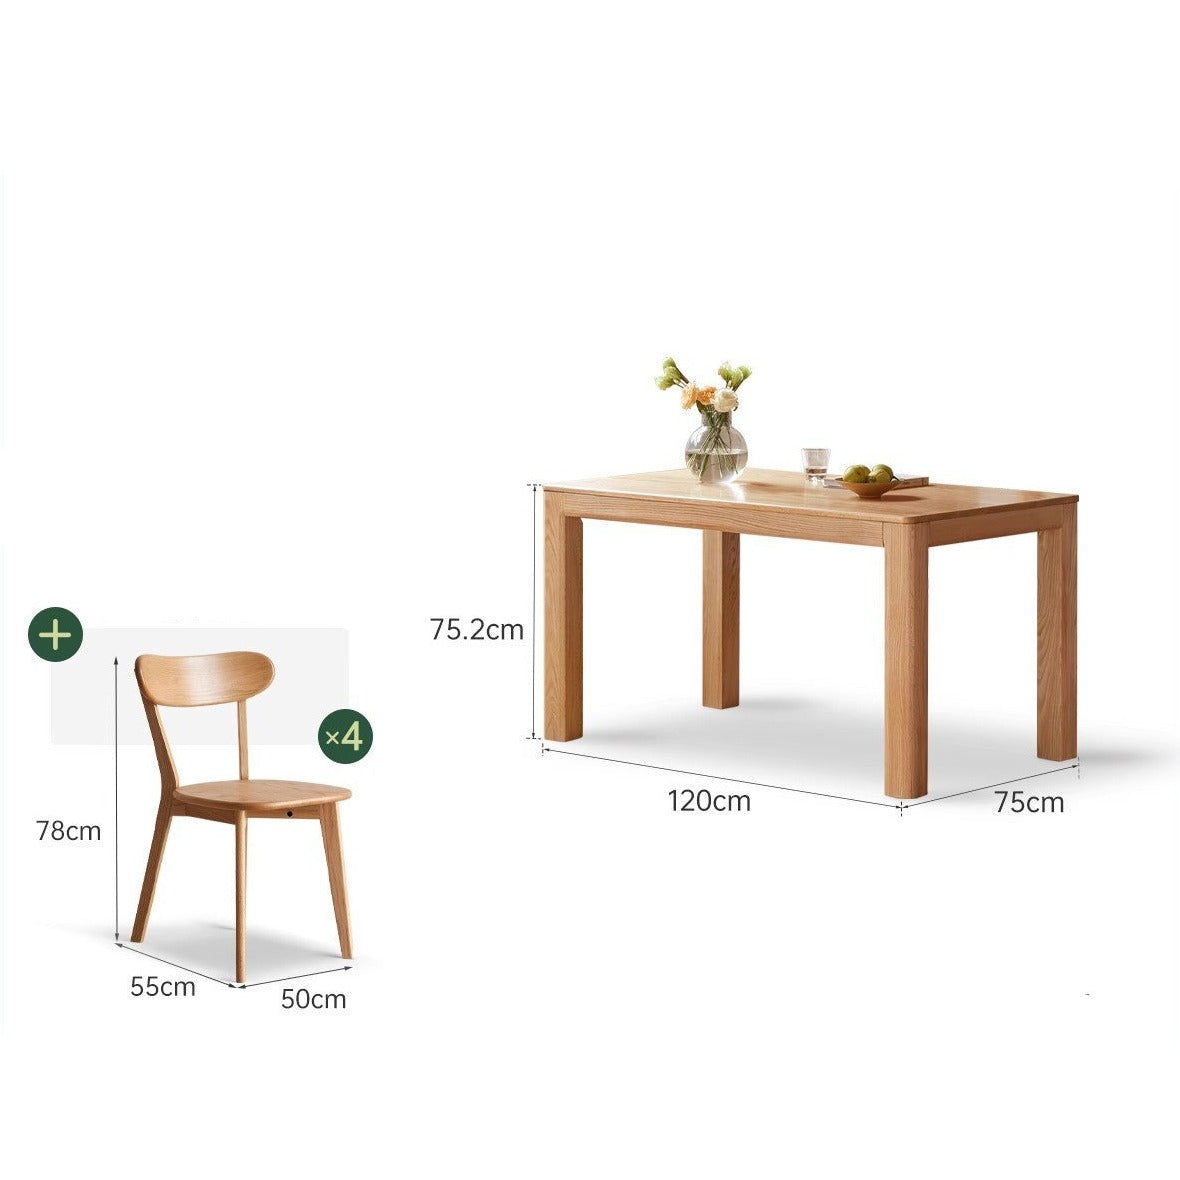 Oak Solid Wood Rectangular Dining Table, One Table and Four Chairs